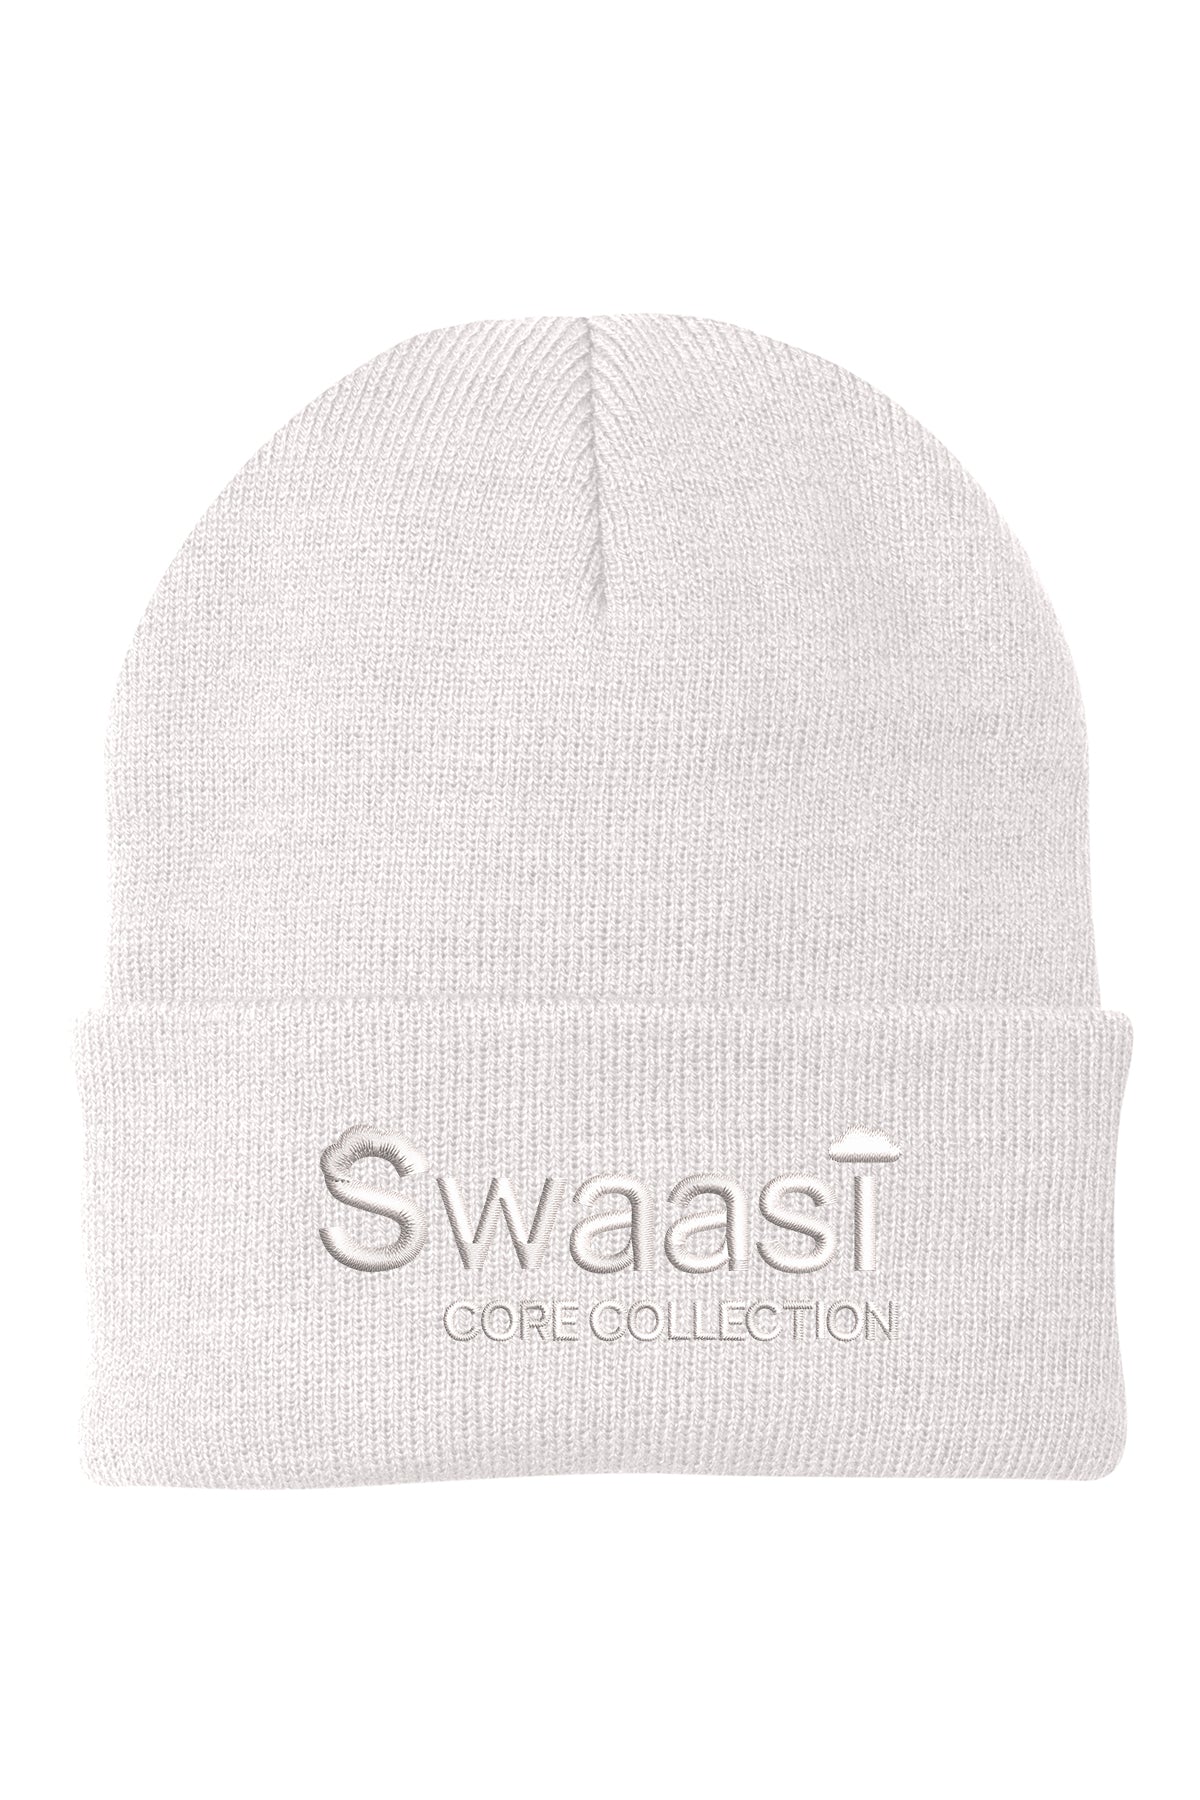 Swaasi Core - P&C® Knit Cap with Embroidery Logo